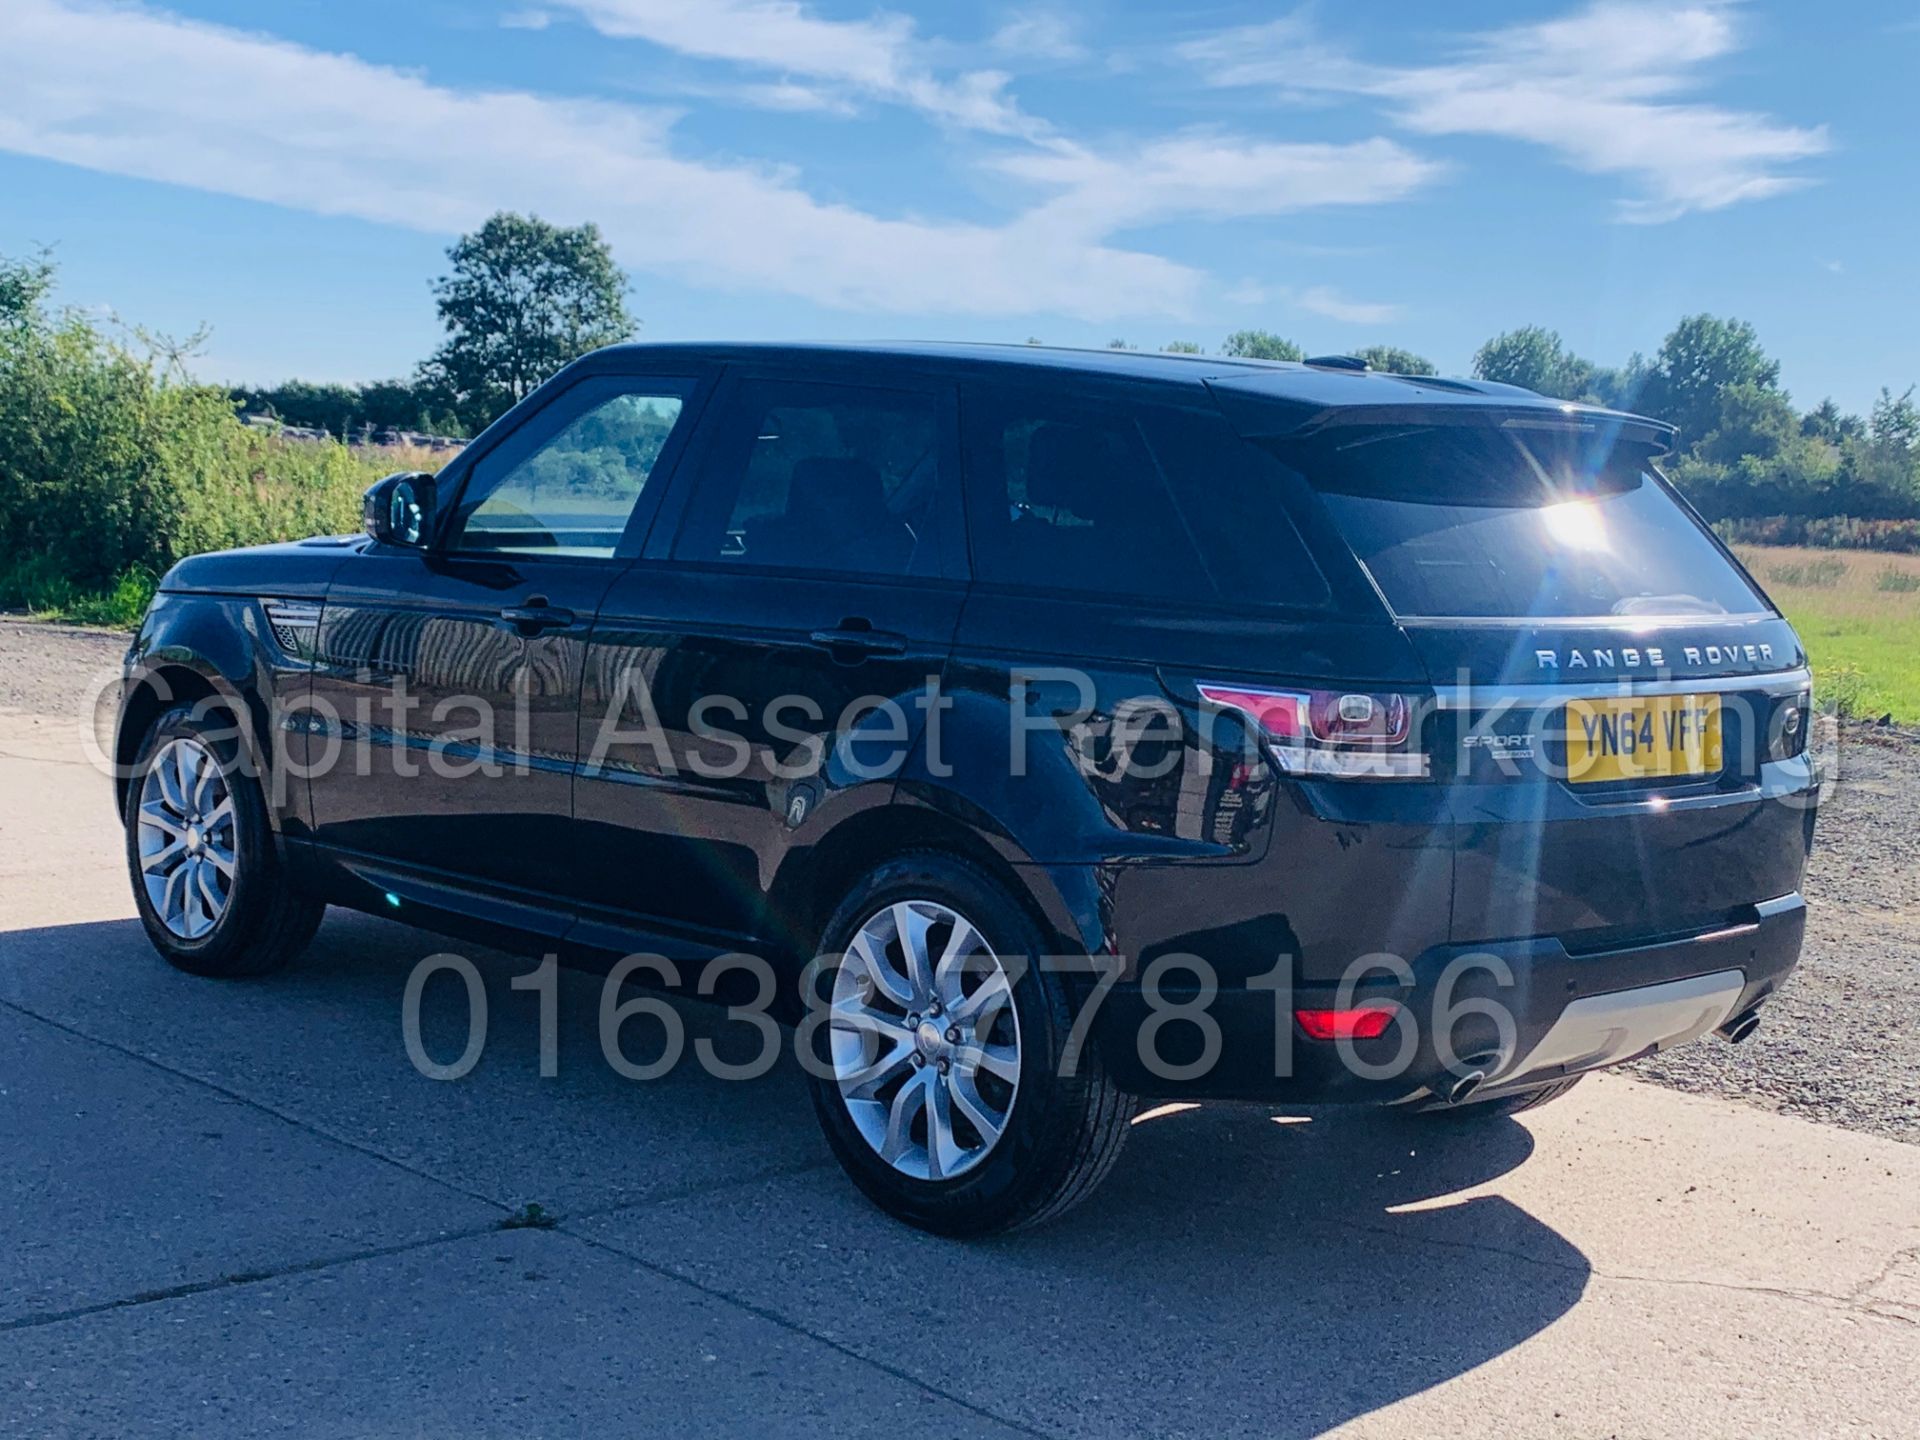 (On Sale) RANGE ROVER SPORT *HSE* 5 DOOR SUV (2015 MODEL) '3.0 SDV6 - 8 SPEED AUTO' *FULLY LOADED* - Image 10 of 59